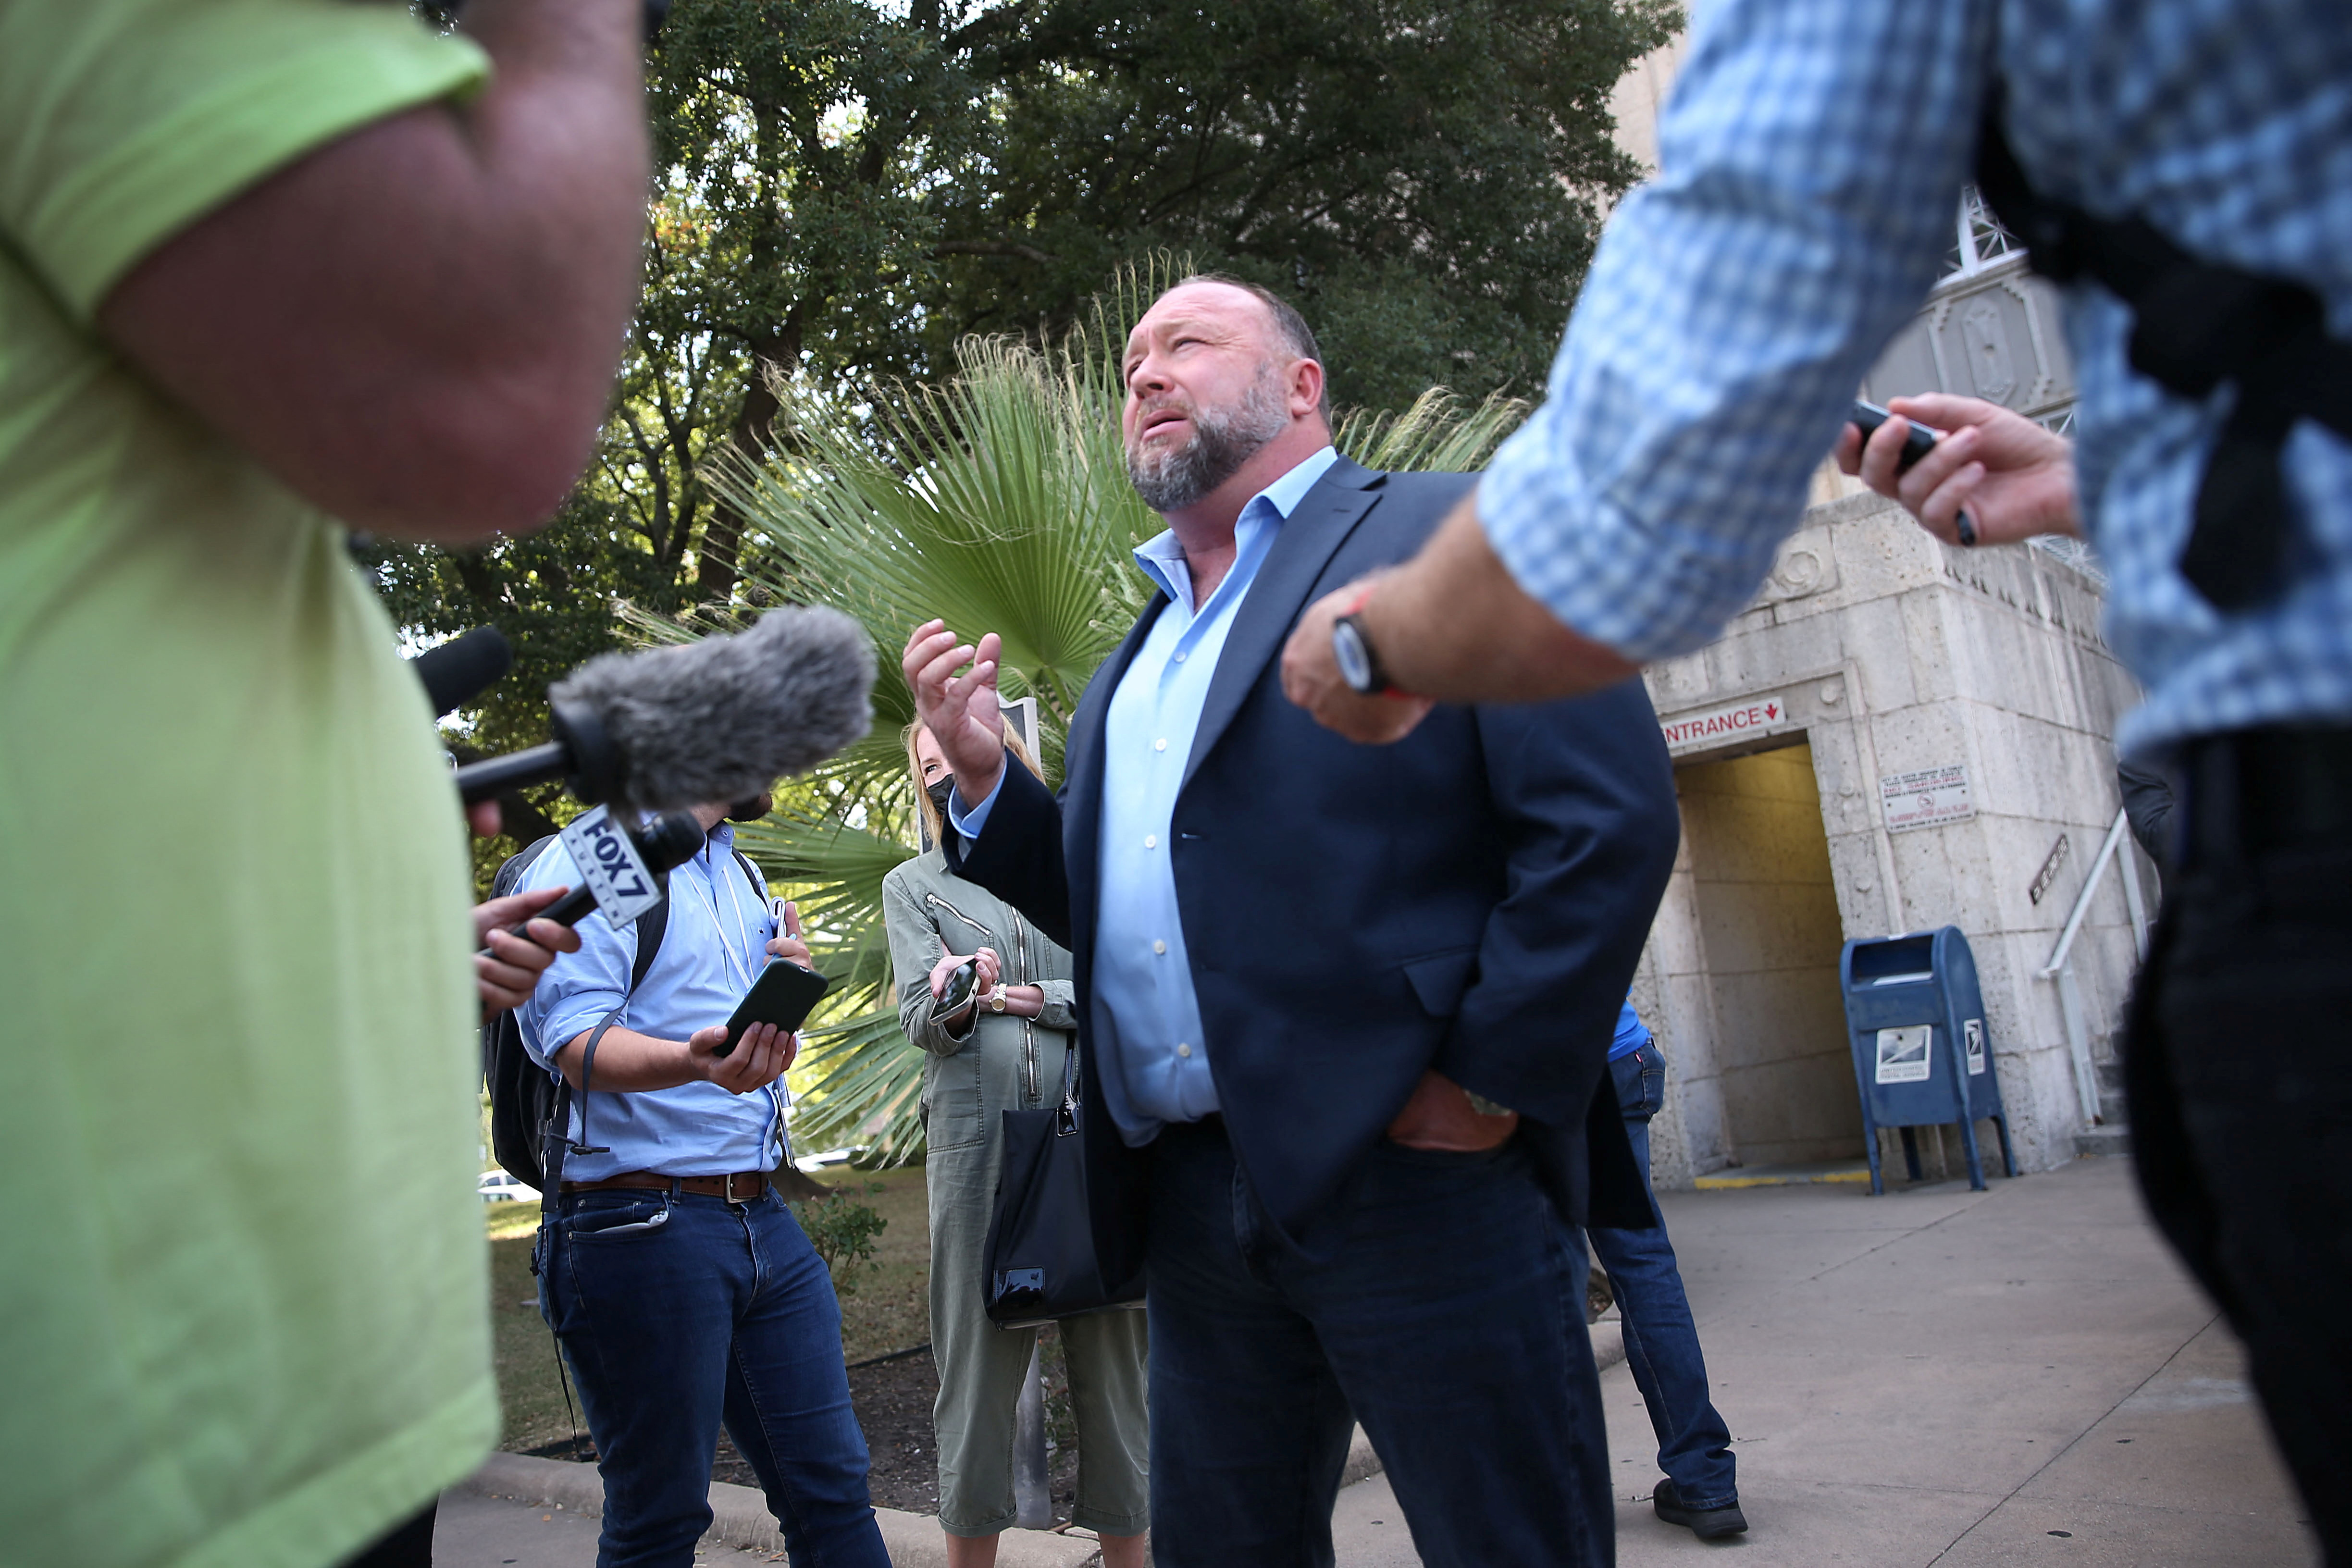 Alex Jones' trial at the Travis County Courthouse, Austin, Texas